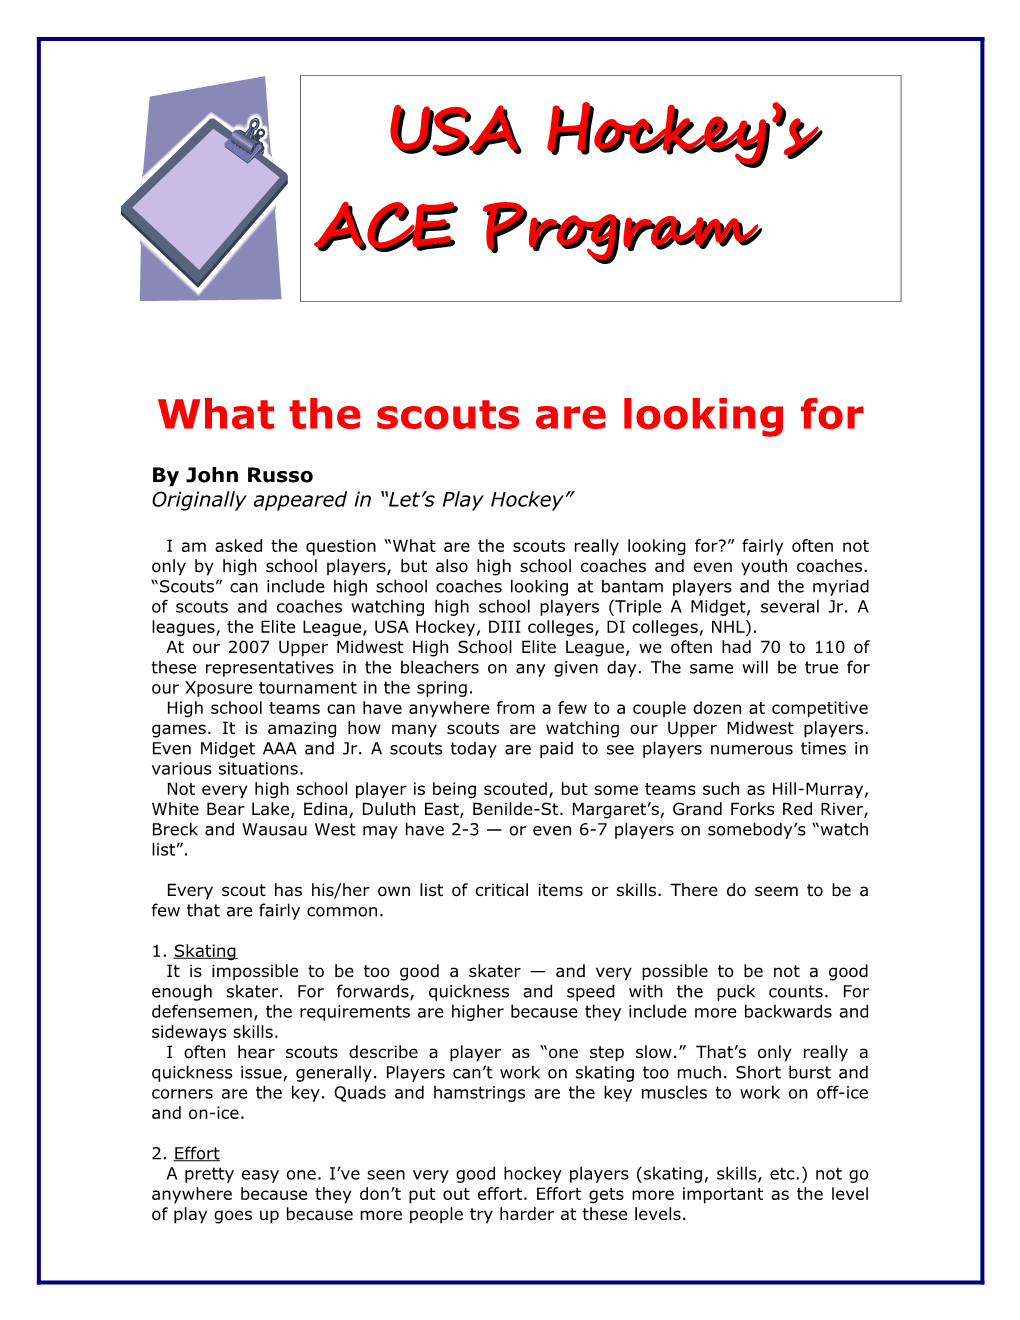 What the Scouts Are Looking For